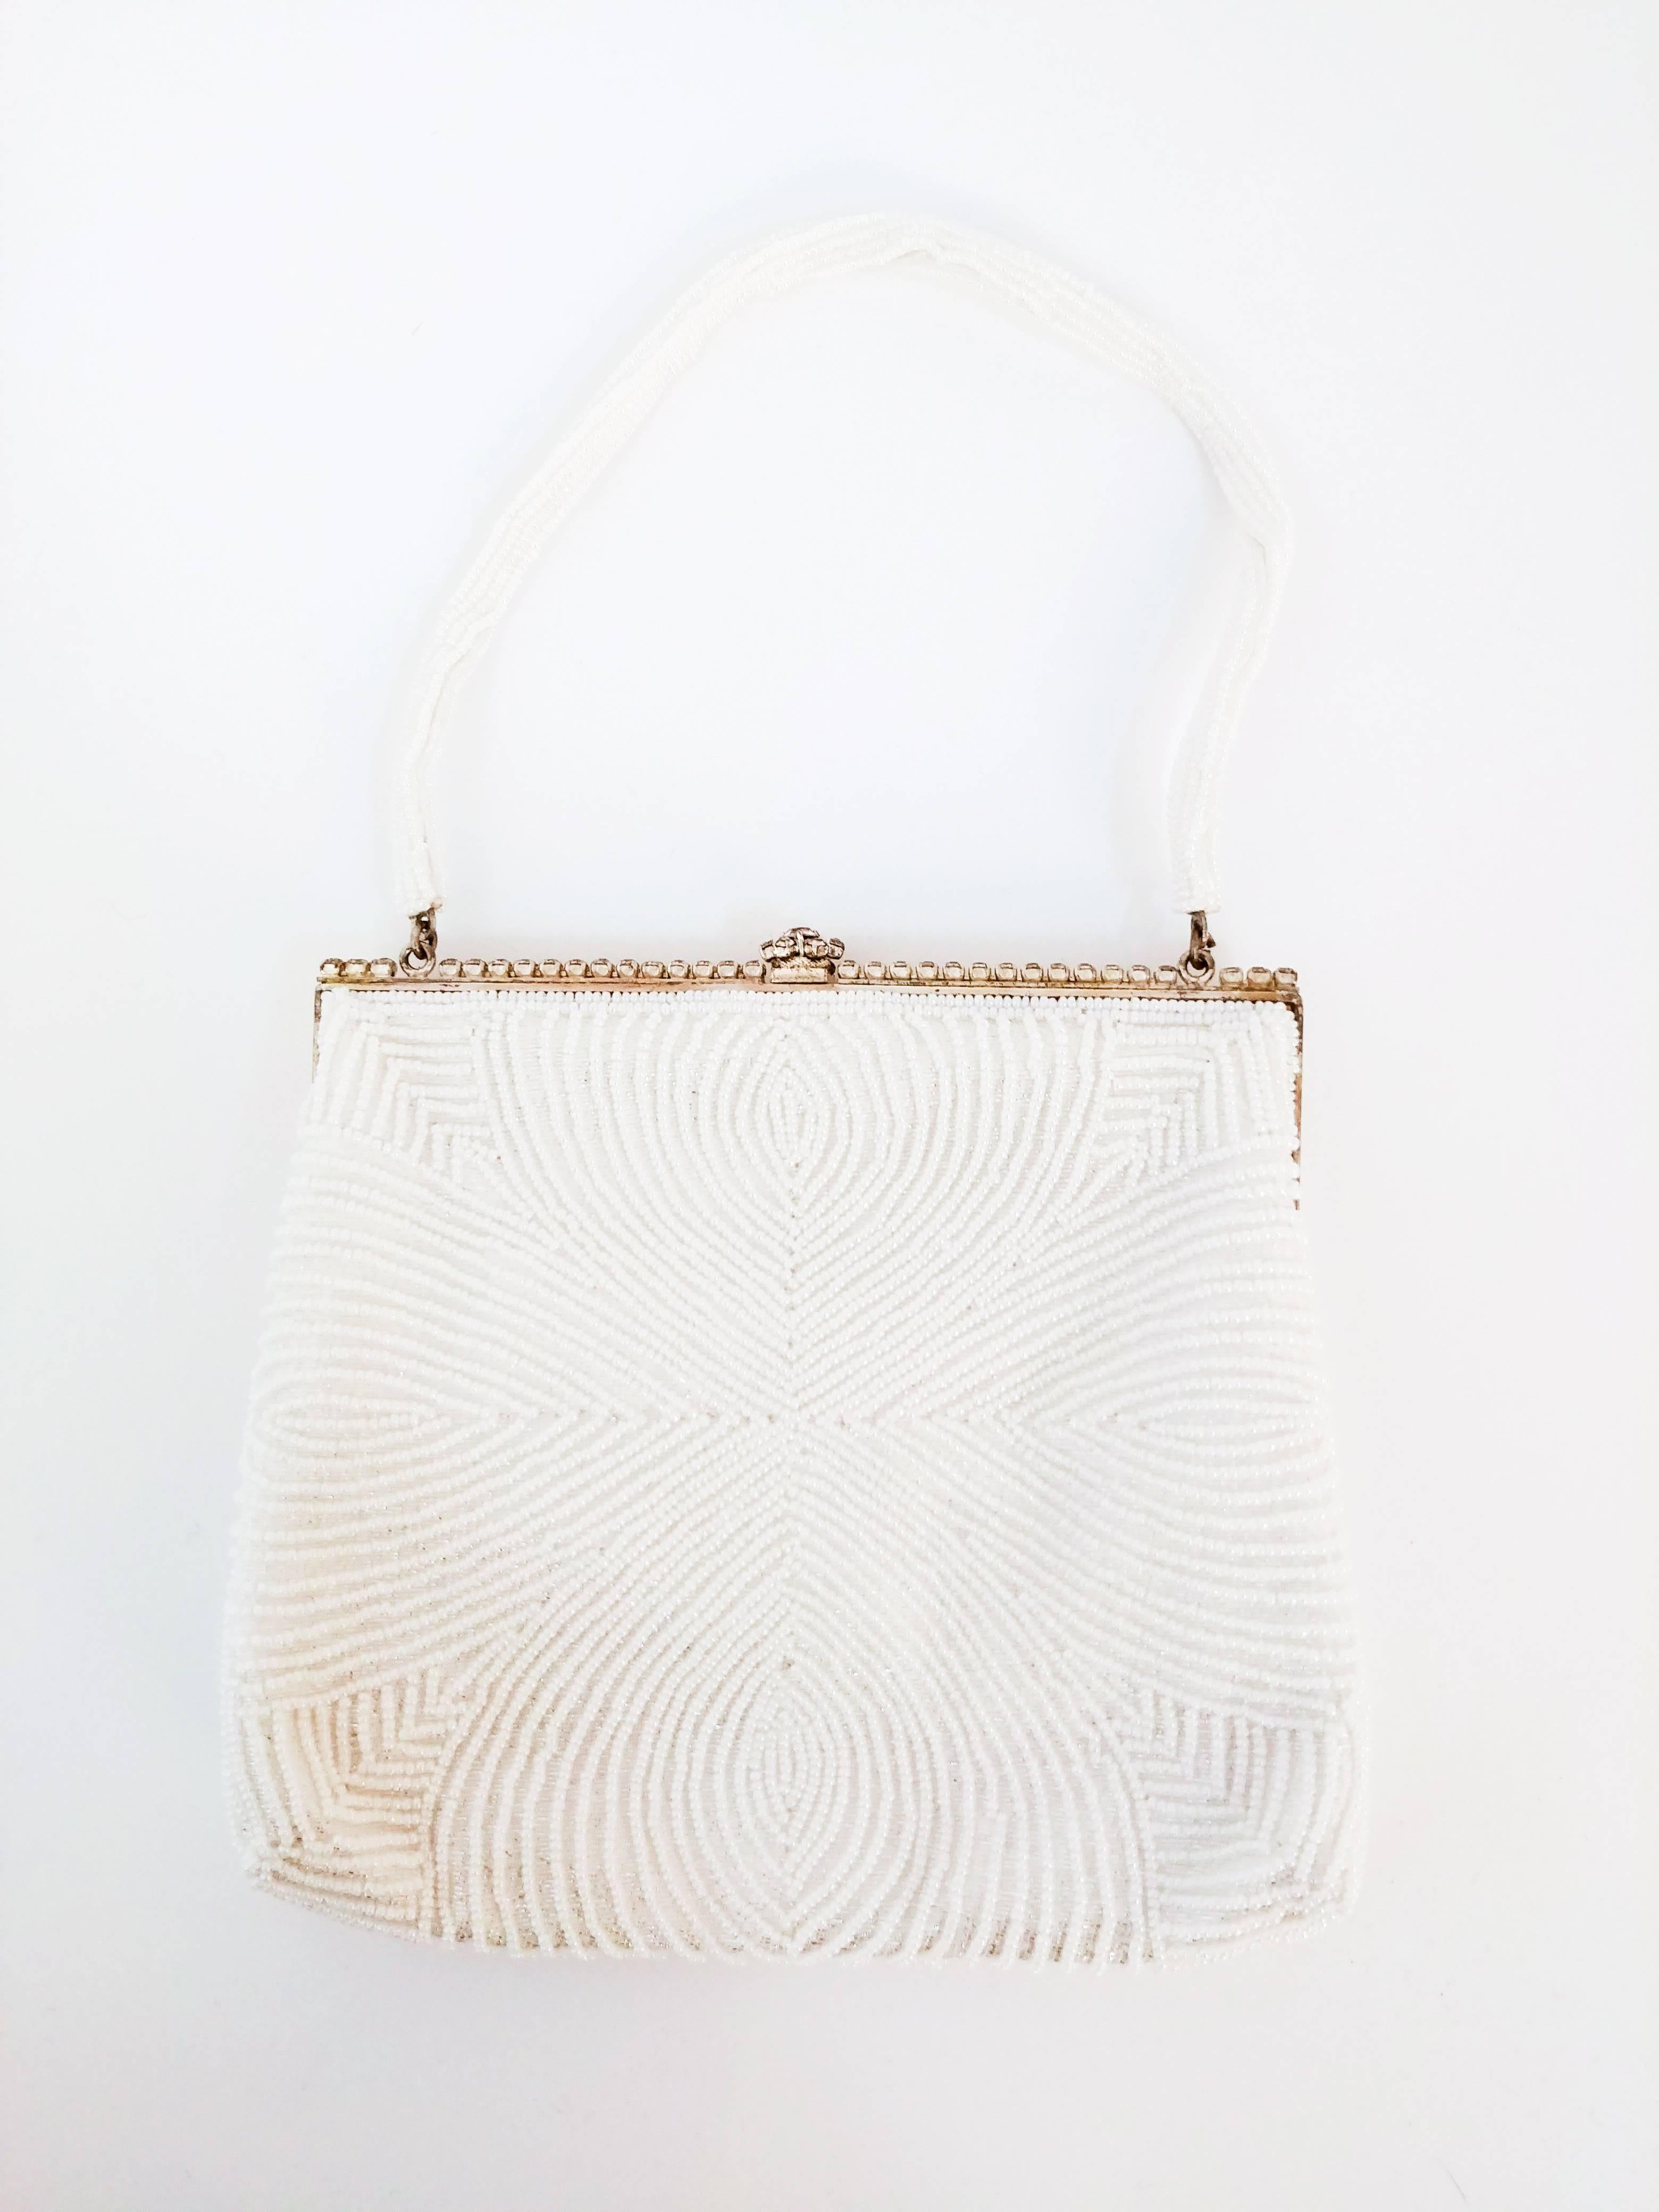 1960s Walborg White Beaded Evening Purse w/ Rhinestones. White silk satin lining, comes with matching mirror. Geometric design on front done in rhinestones on all-over beaded purse, and rhinestones on gold toned hardware and clasp.